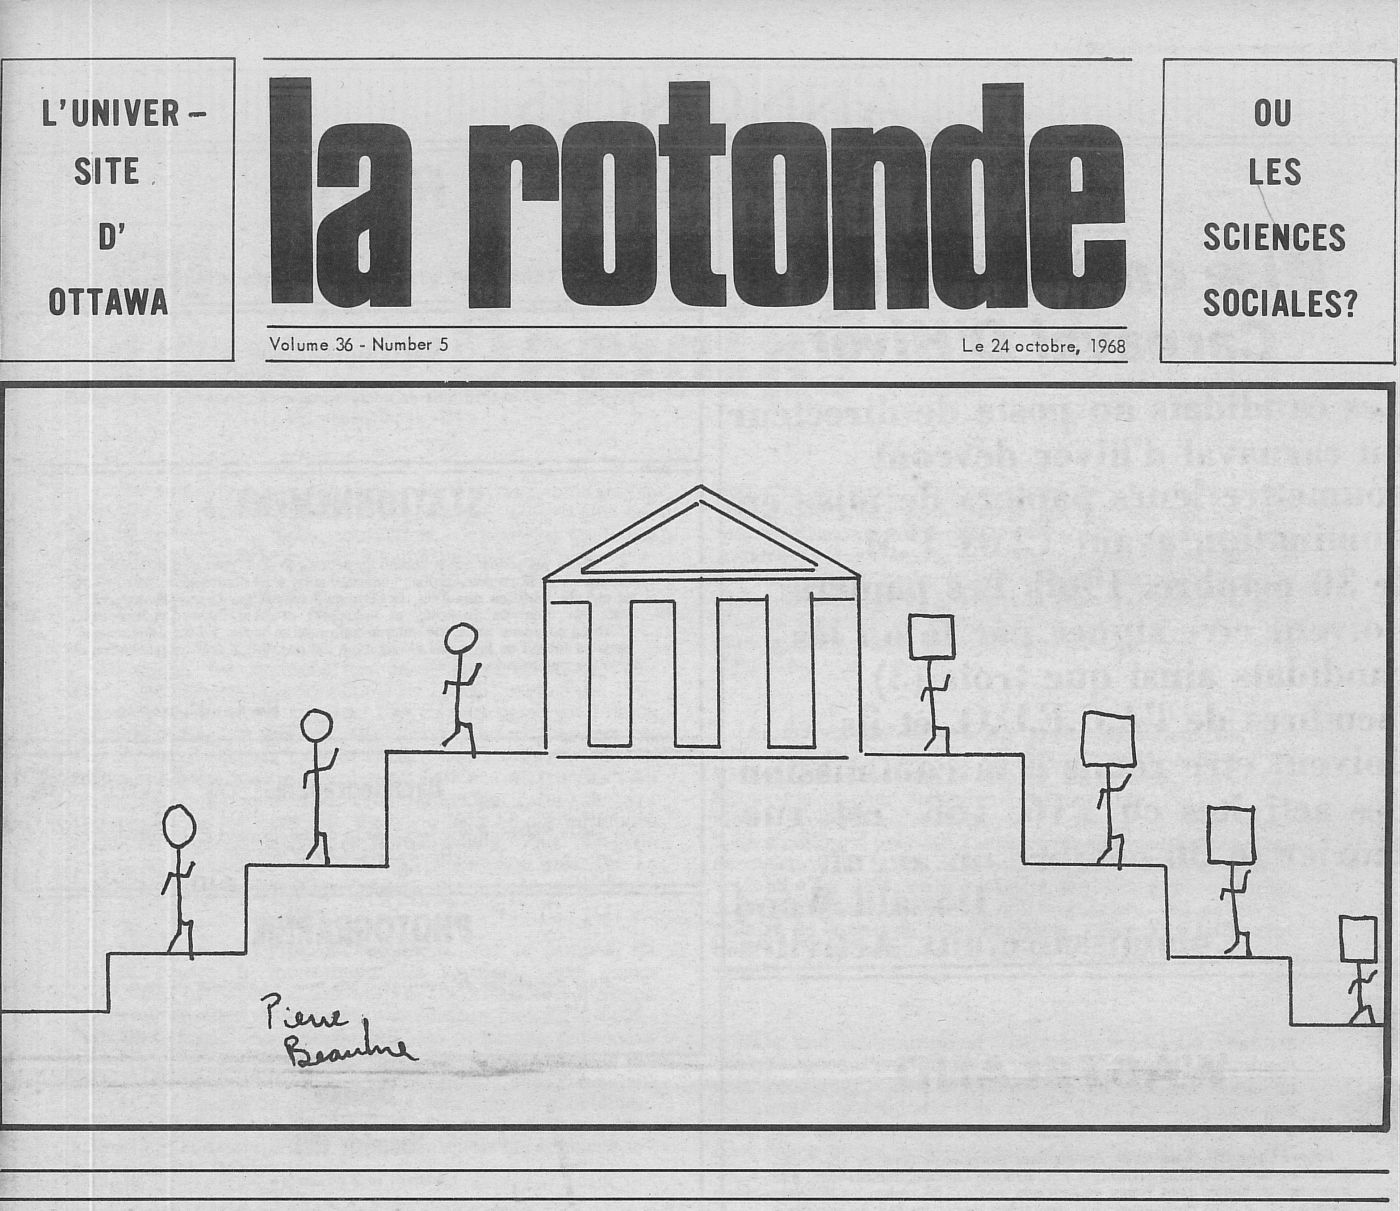 First page of a French newspaper. A drawing depicts figures with round heads climbing stairs to a building. They emerge from the other side with square heads, and leave by another flight of stairs. A signature at the bottom of the drawing.